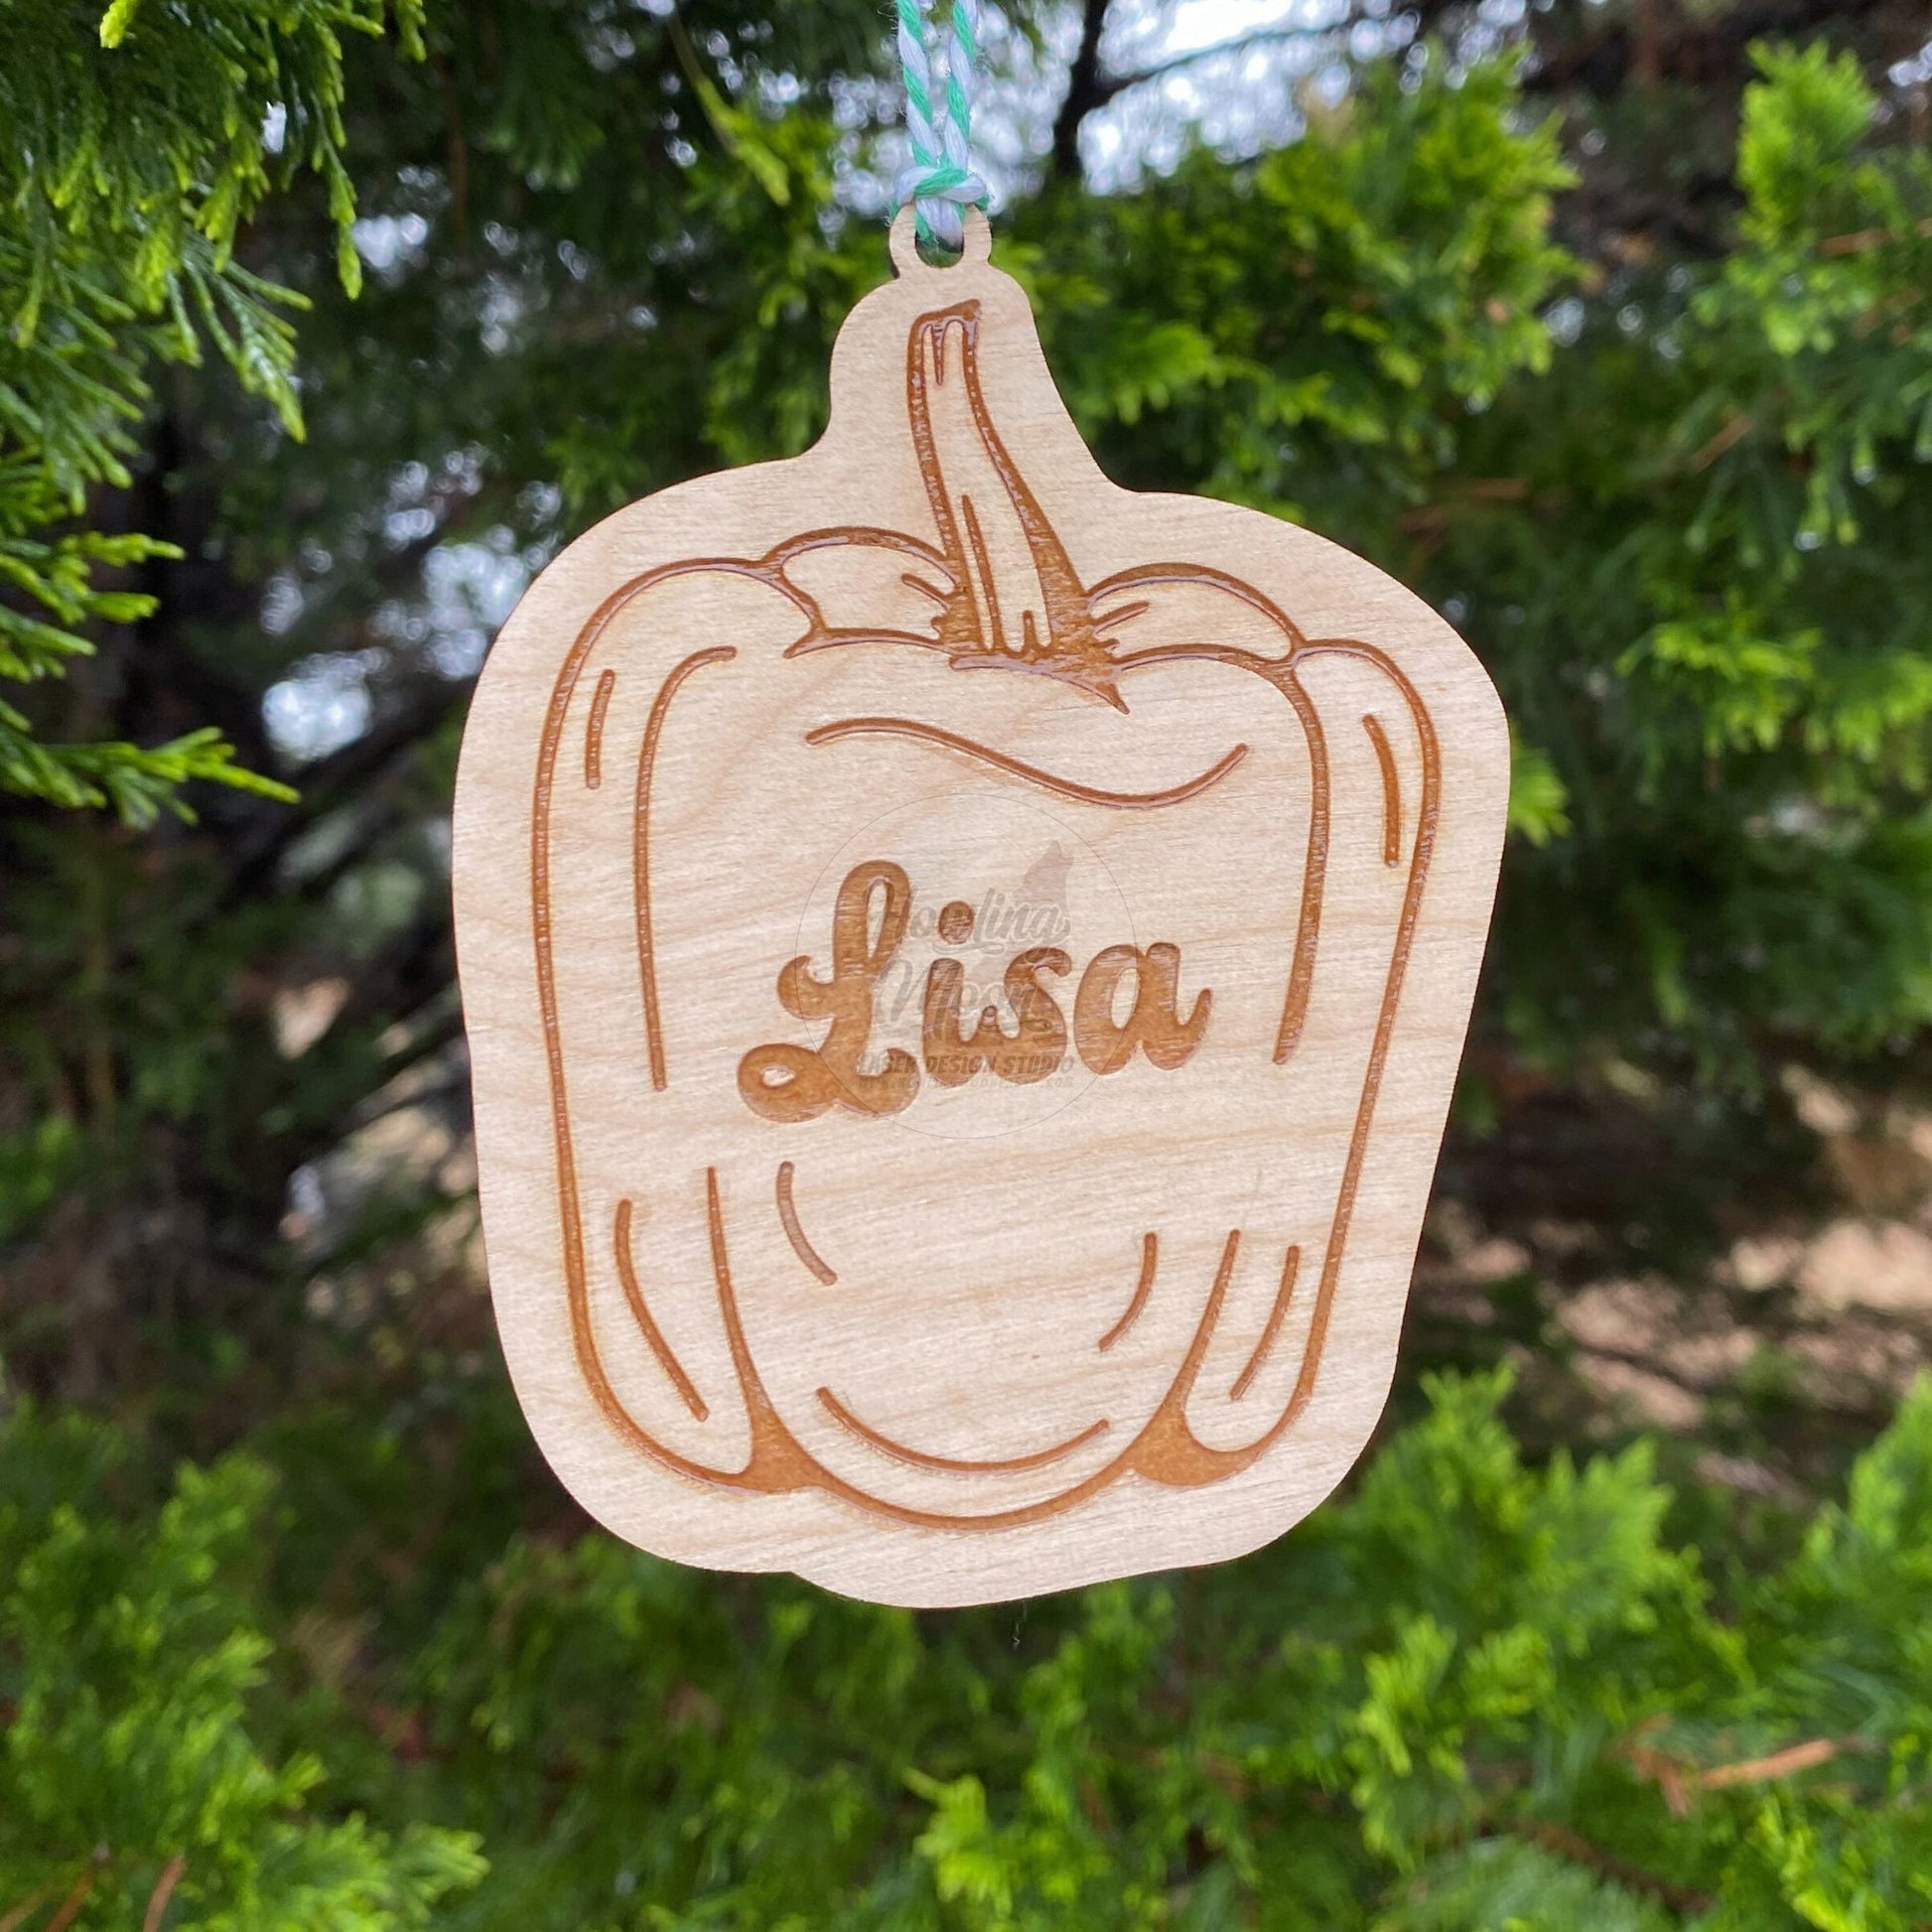 Personalized bell pepper ornaments handcrafted from natural wood made in Virginia USA by Howling Moon Laser Design Studio.